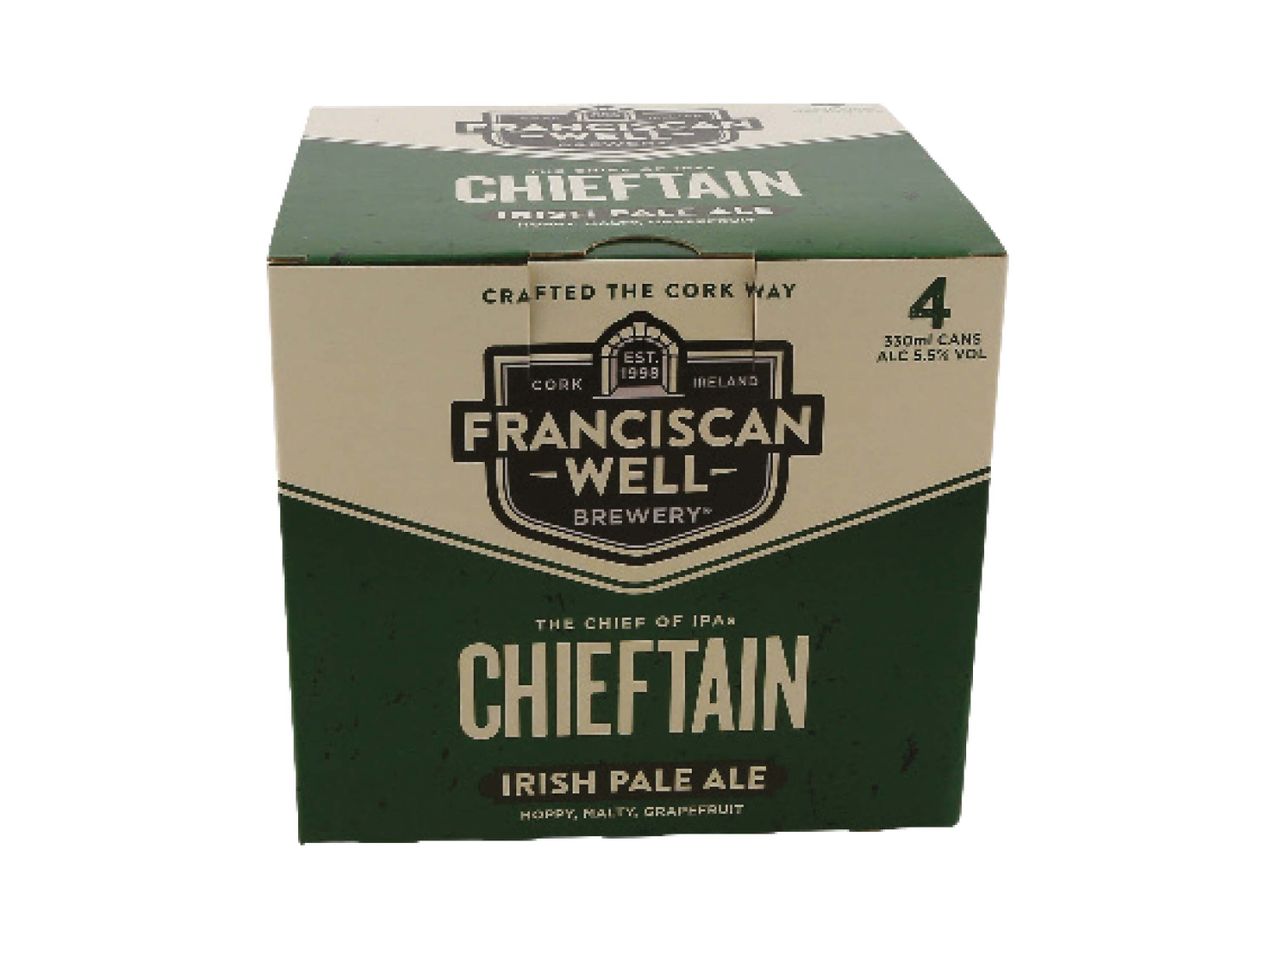 Go to full screen view: Chieftain IPA 5.5% - Image 1